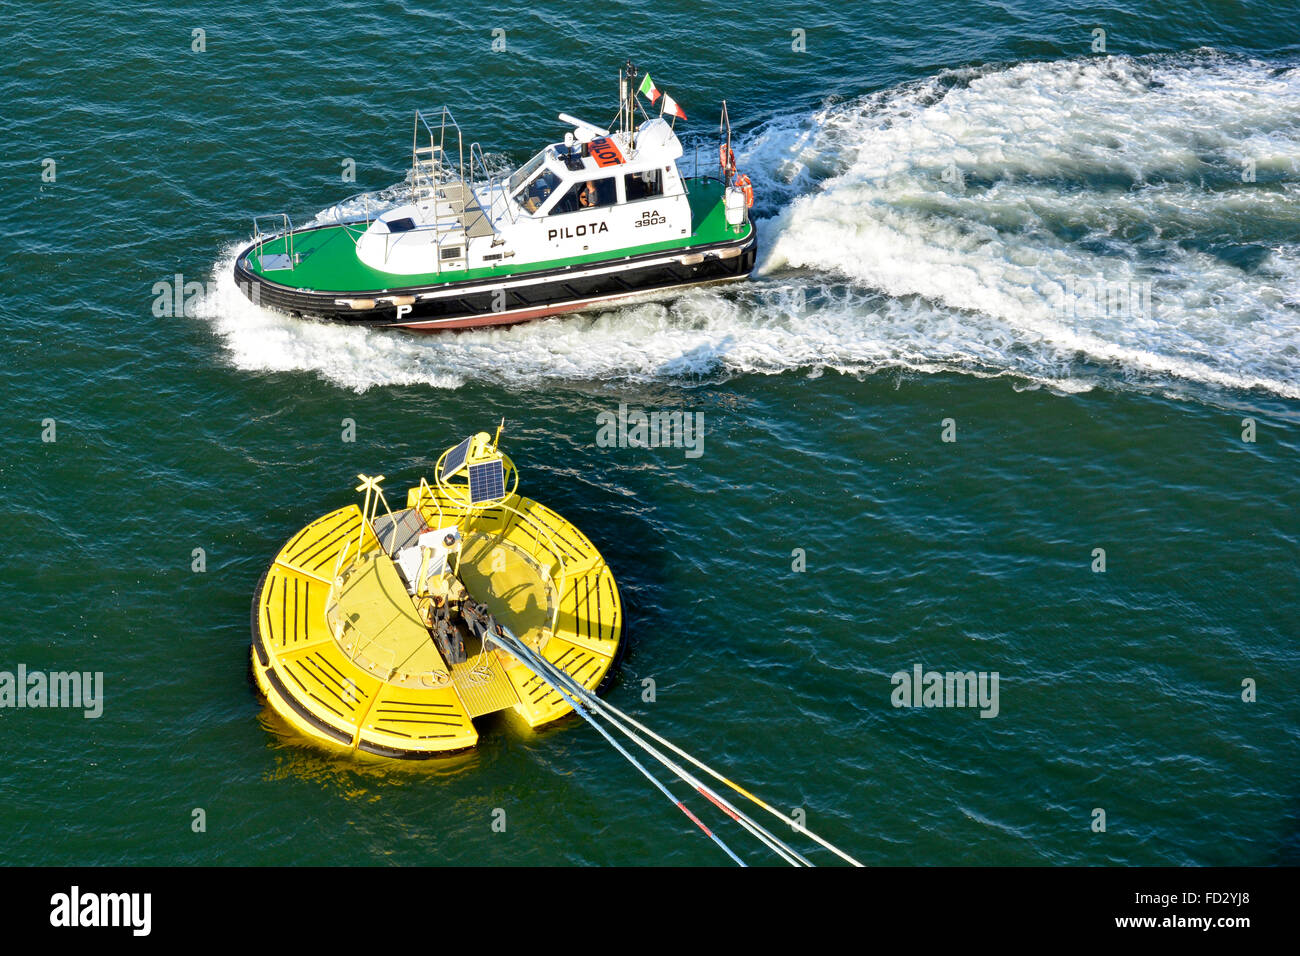 Pilot motorboat & cruise ship ocean liner hawsers fixed to Floatex floating anchor buoy anchored to sea bed fitted with solar panel Ravenna Italy Stock Photo